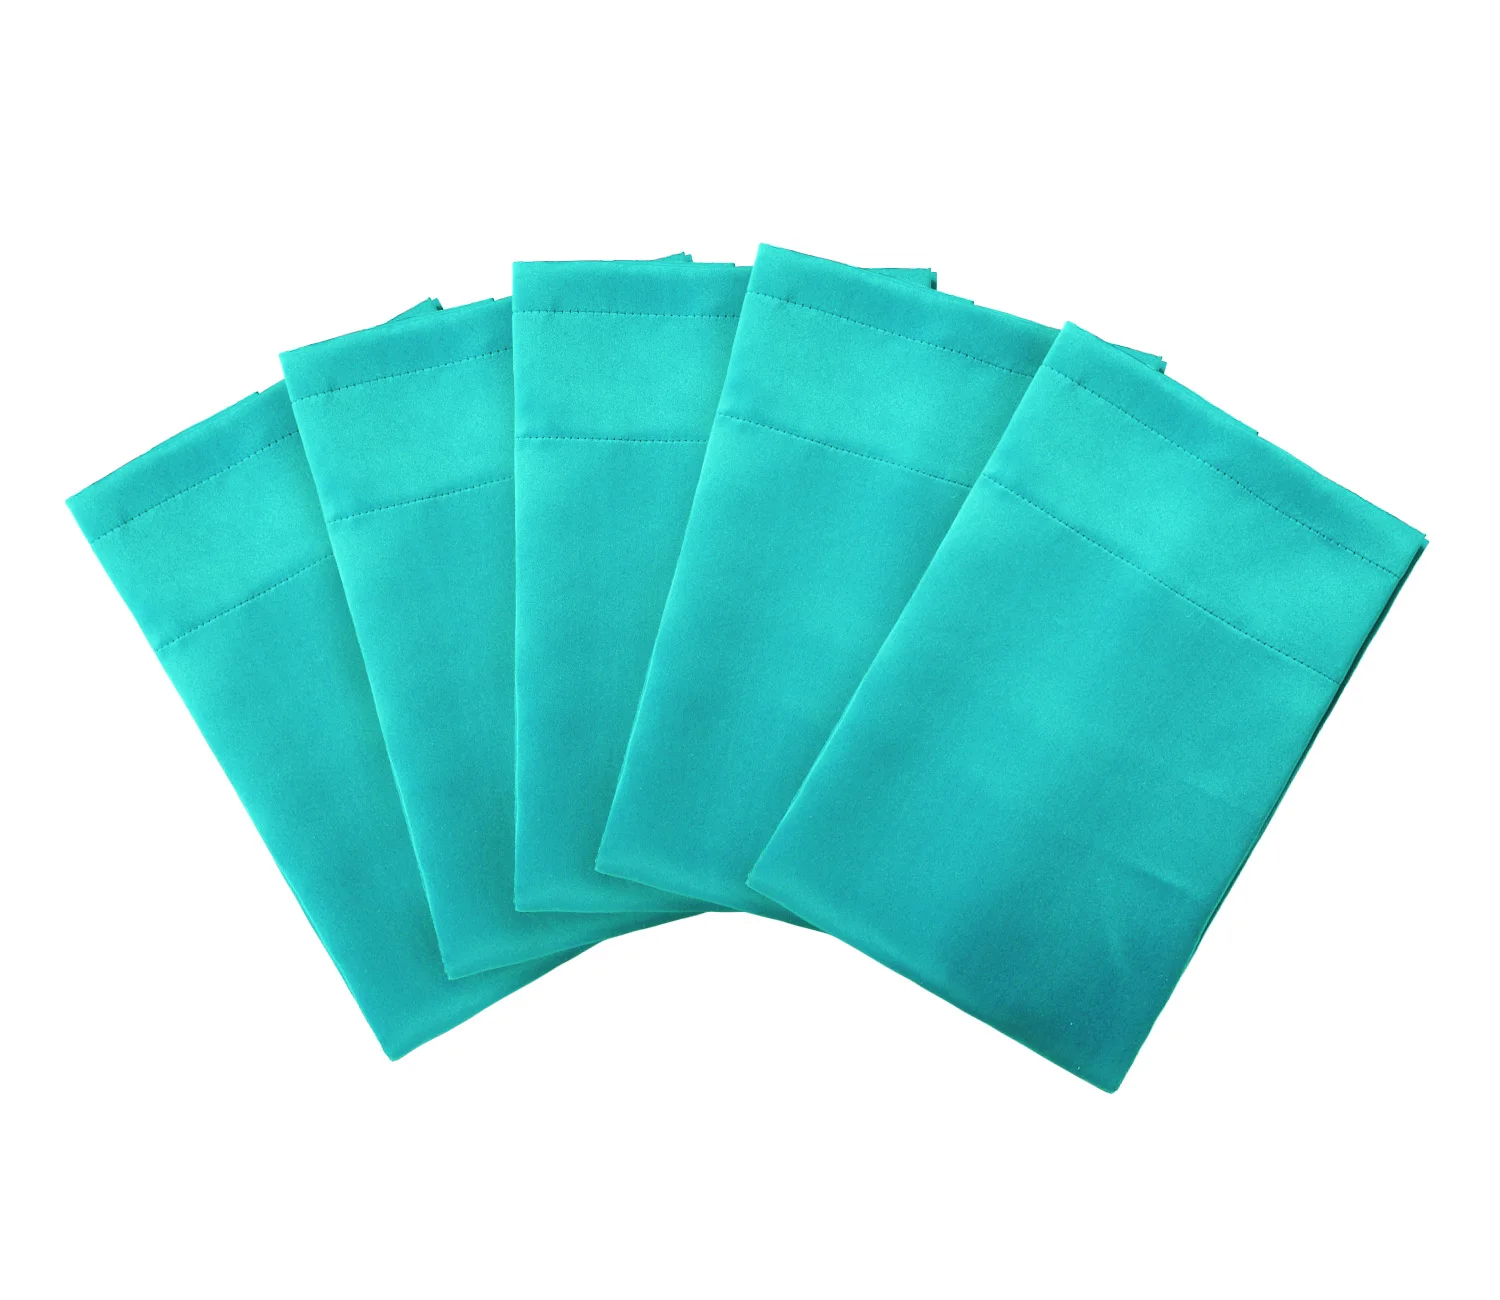 Teal Blackout Curtains Rod Pocket Drapes And Curtains Thermal Insulated Curtains For Kids Bedroom 42 W X 95 L Teal 4 Panels Buy Rod Pocket Drapes And Curtains Thermal Insulated Curtains Teal Blackout